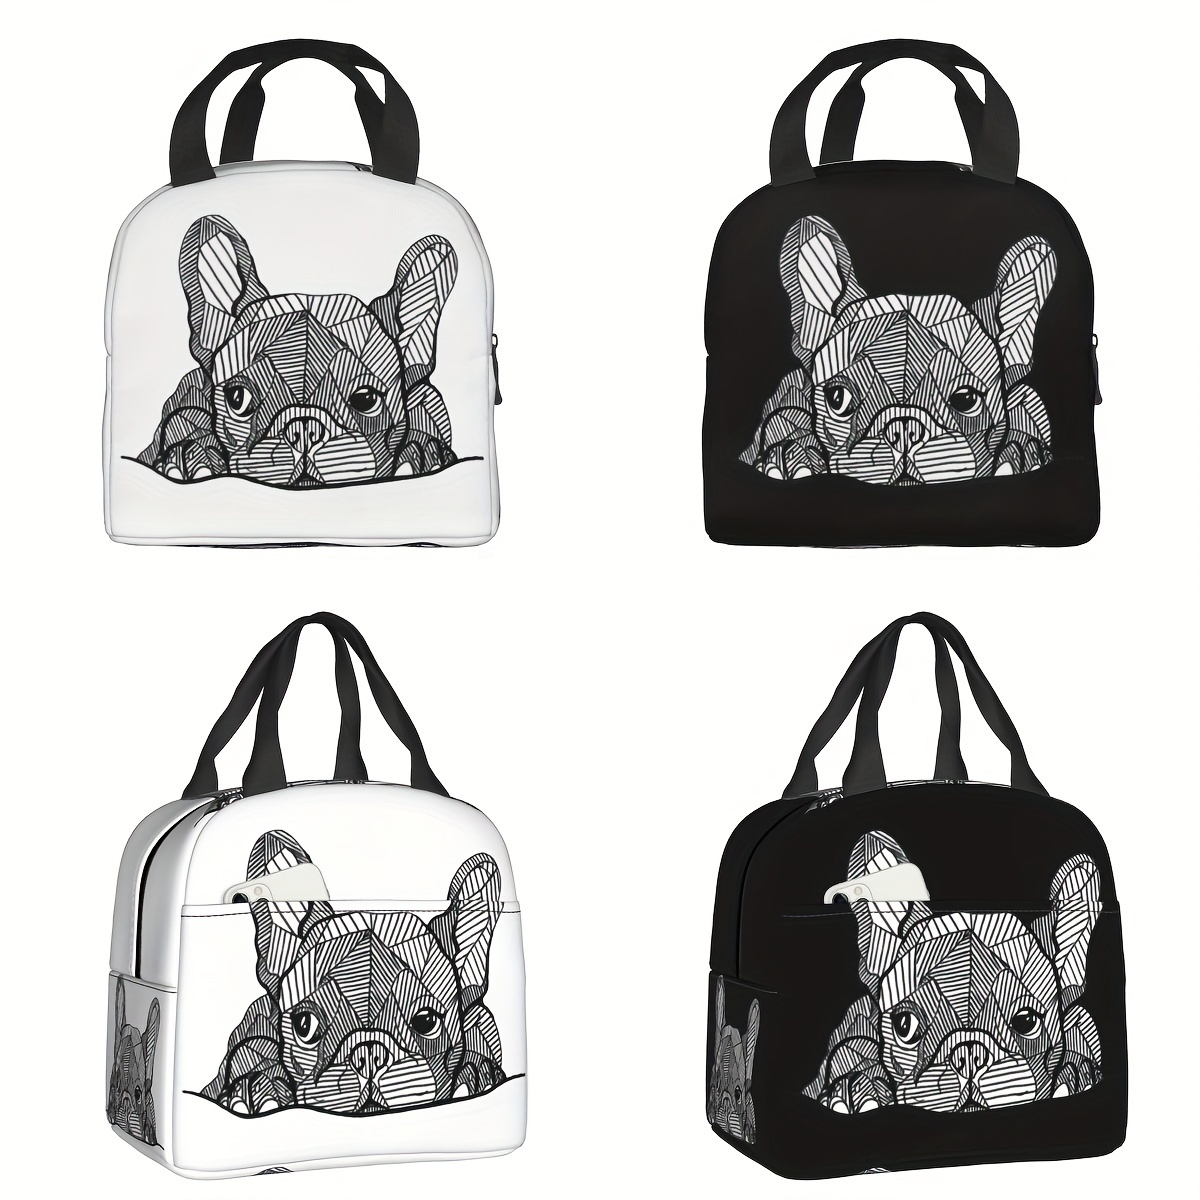 

adorable Frenchie" French Bulldog Insulated Lunch Bag - Durable, Waterproof Oxford Fabric Bento Box Carrier For School, Office, And Outdoor Adventures - Large Capacity, Reusable